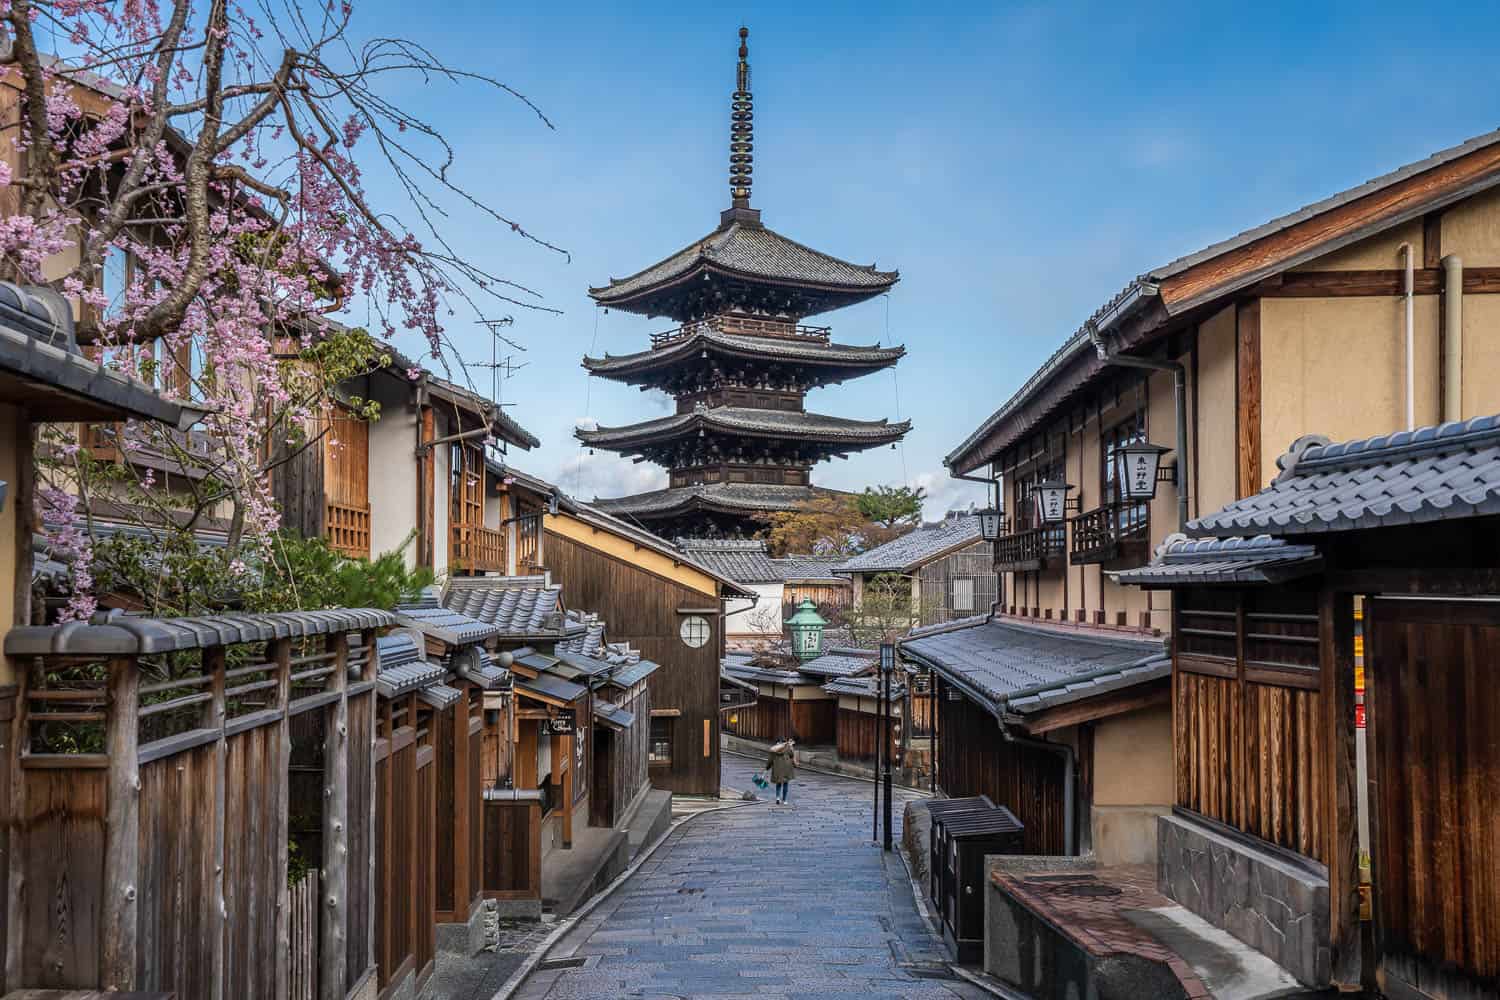 Where to stay in Kyoto - Traditional Japanese Homes (Higashiyama